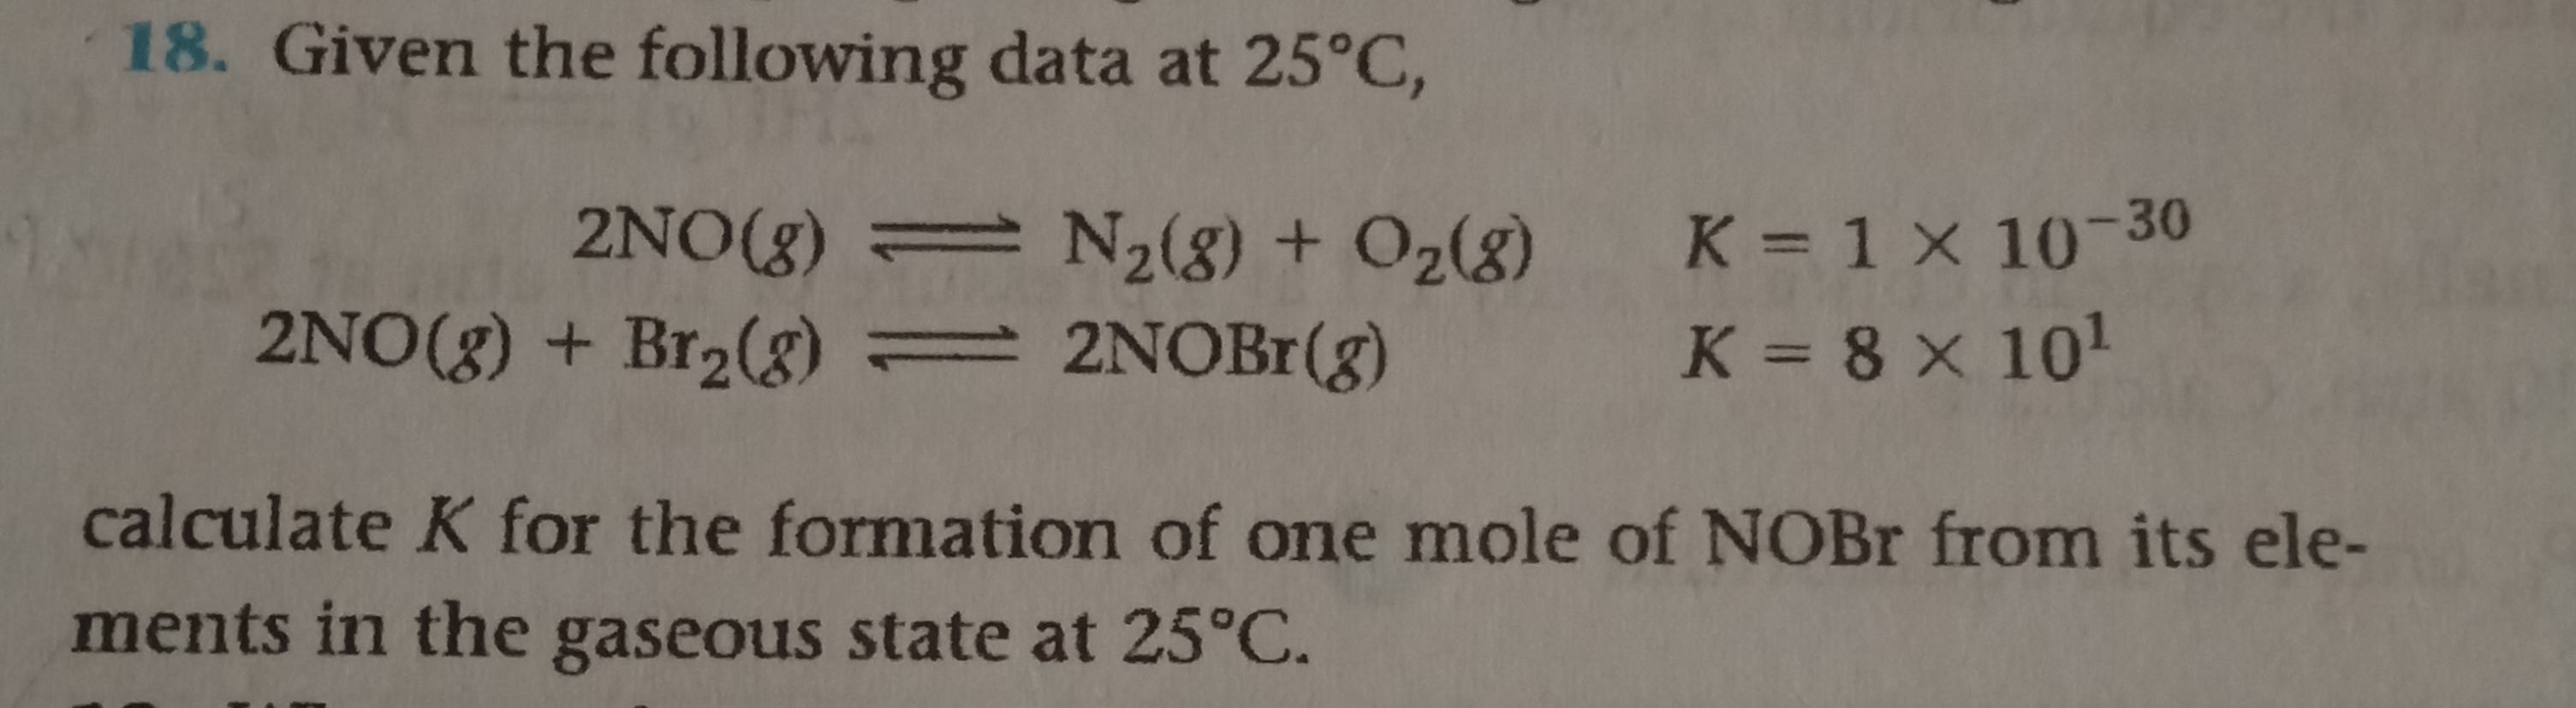 18. Given the following data at 25°C,
2NO(g) = N2(8) + O2(g) K = 1 × 10-30
K = 8 x 101
2NO(g) + Br2(g) 2NOB (g)
calculate K for the formation of one mole of NOBR from its ele-
ments in the gaseous state at 25°C.
